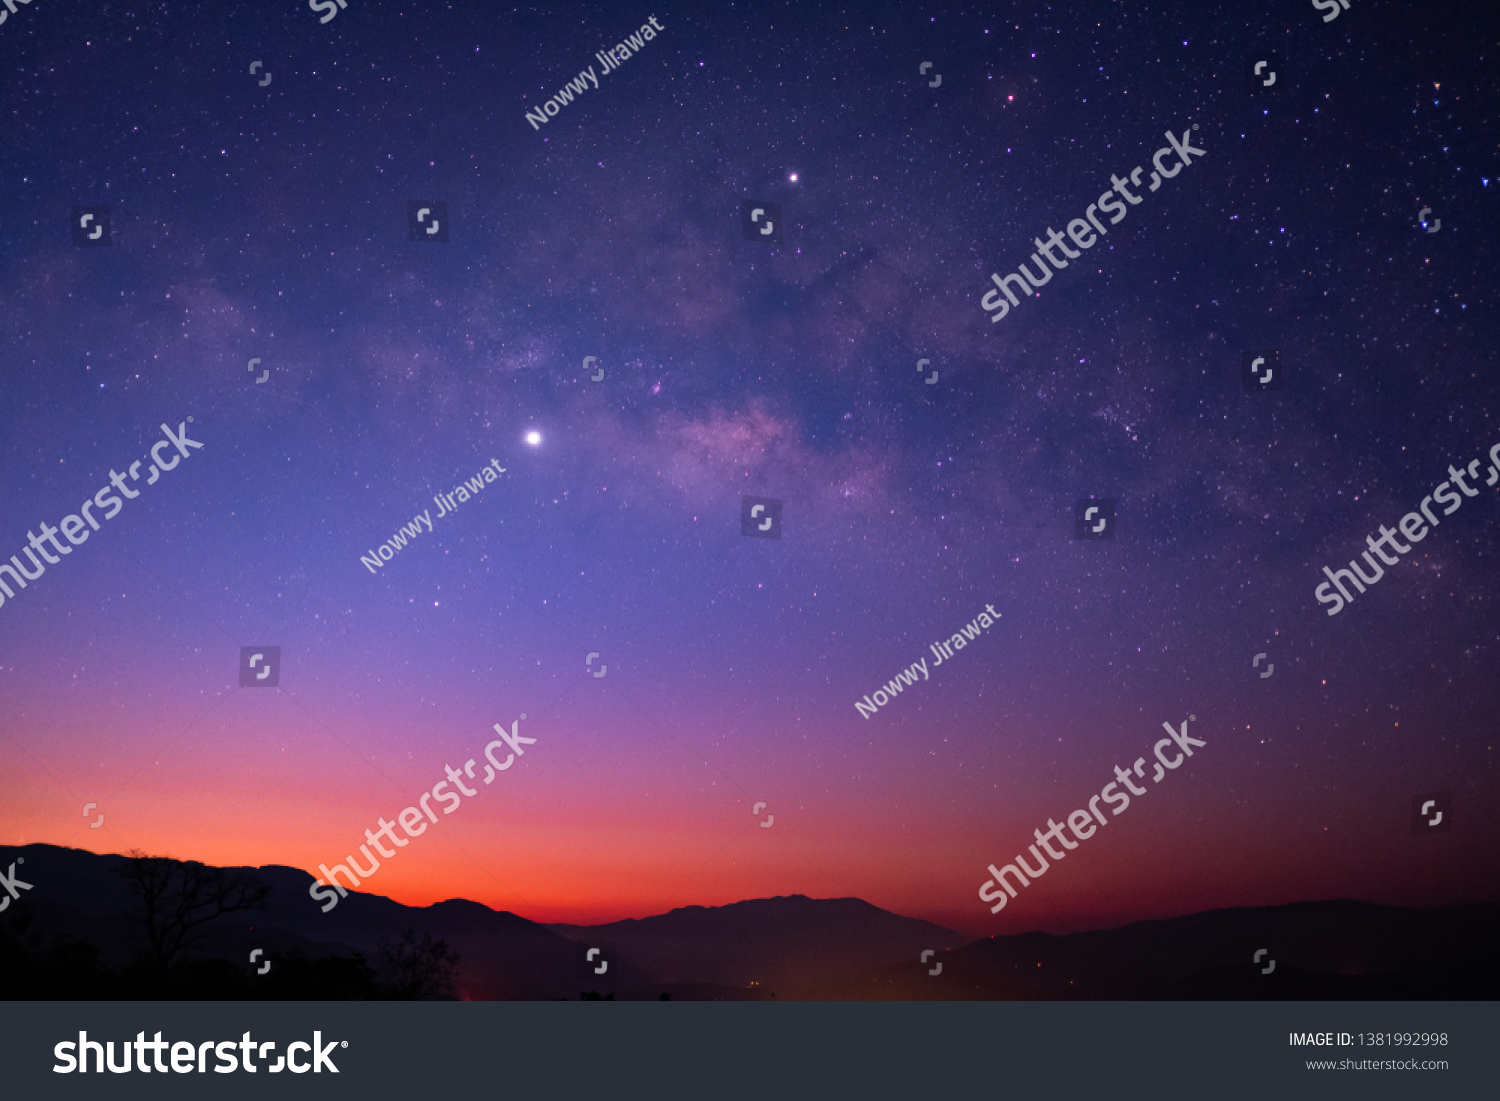 Milky Way galaxy with Jupiter Venus and Saturn over the wildfire mountain at dawn #1381992998